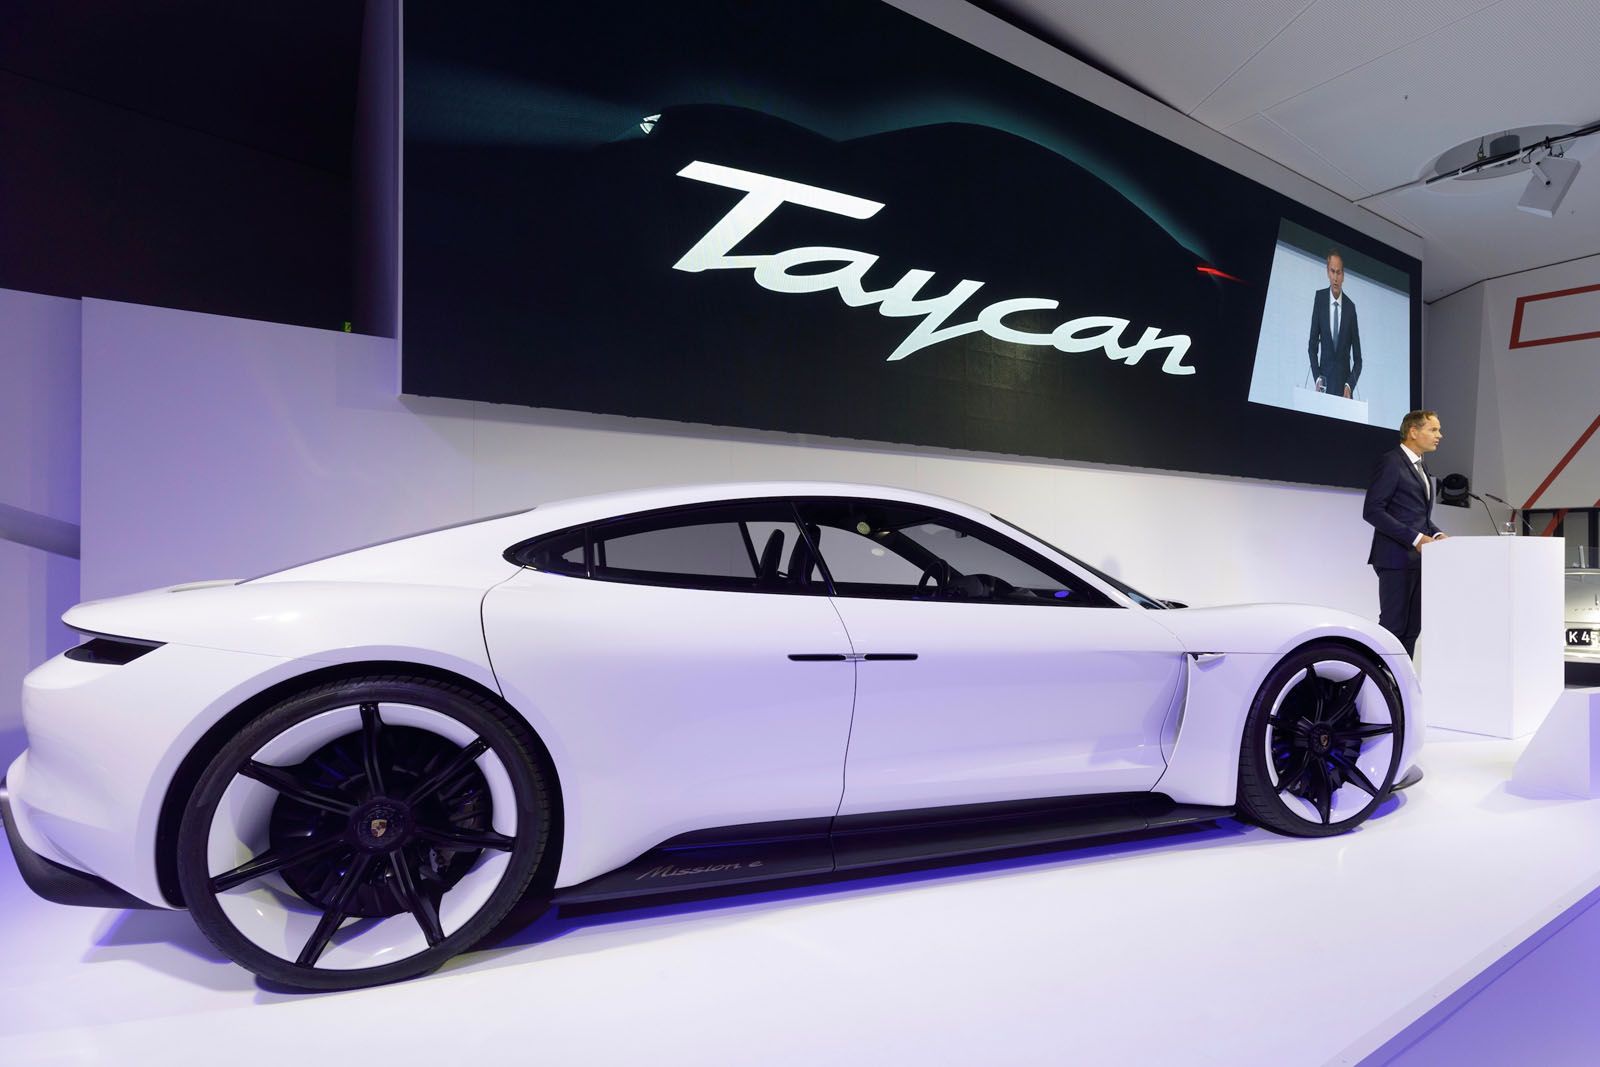 Porsche's first all-electric car gets official name: Taycan